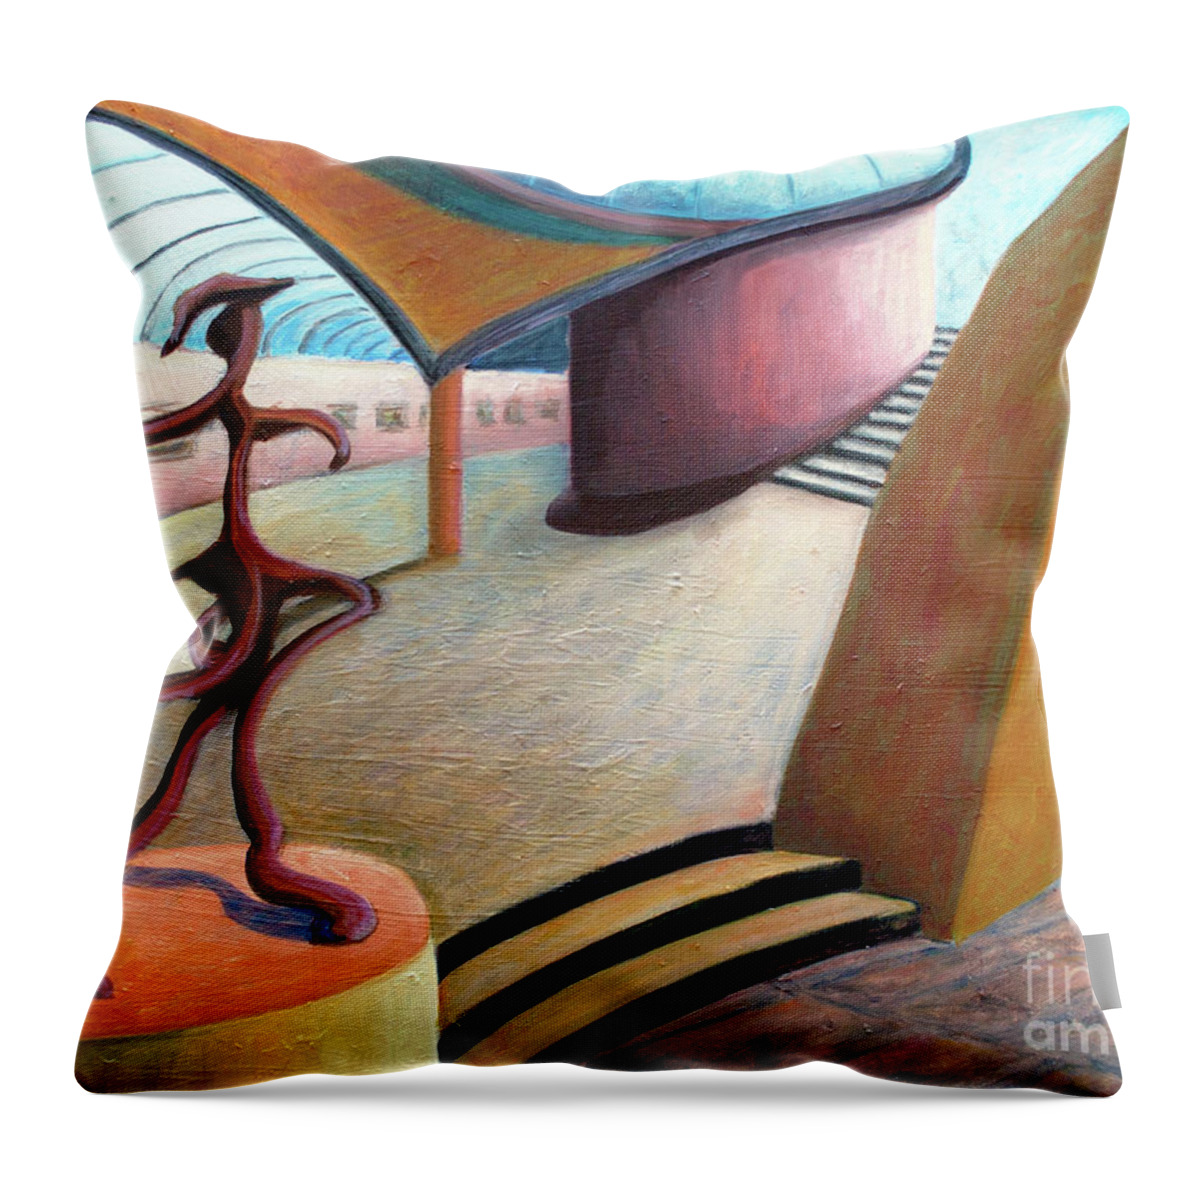 Museum Throw Pillow featuring the painting 01343 Museum by AnneKarin Glass